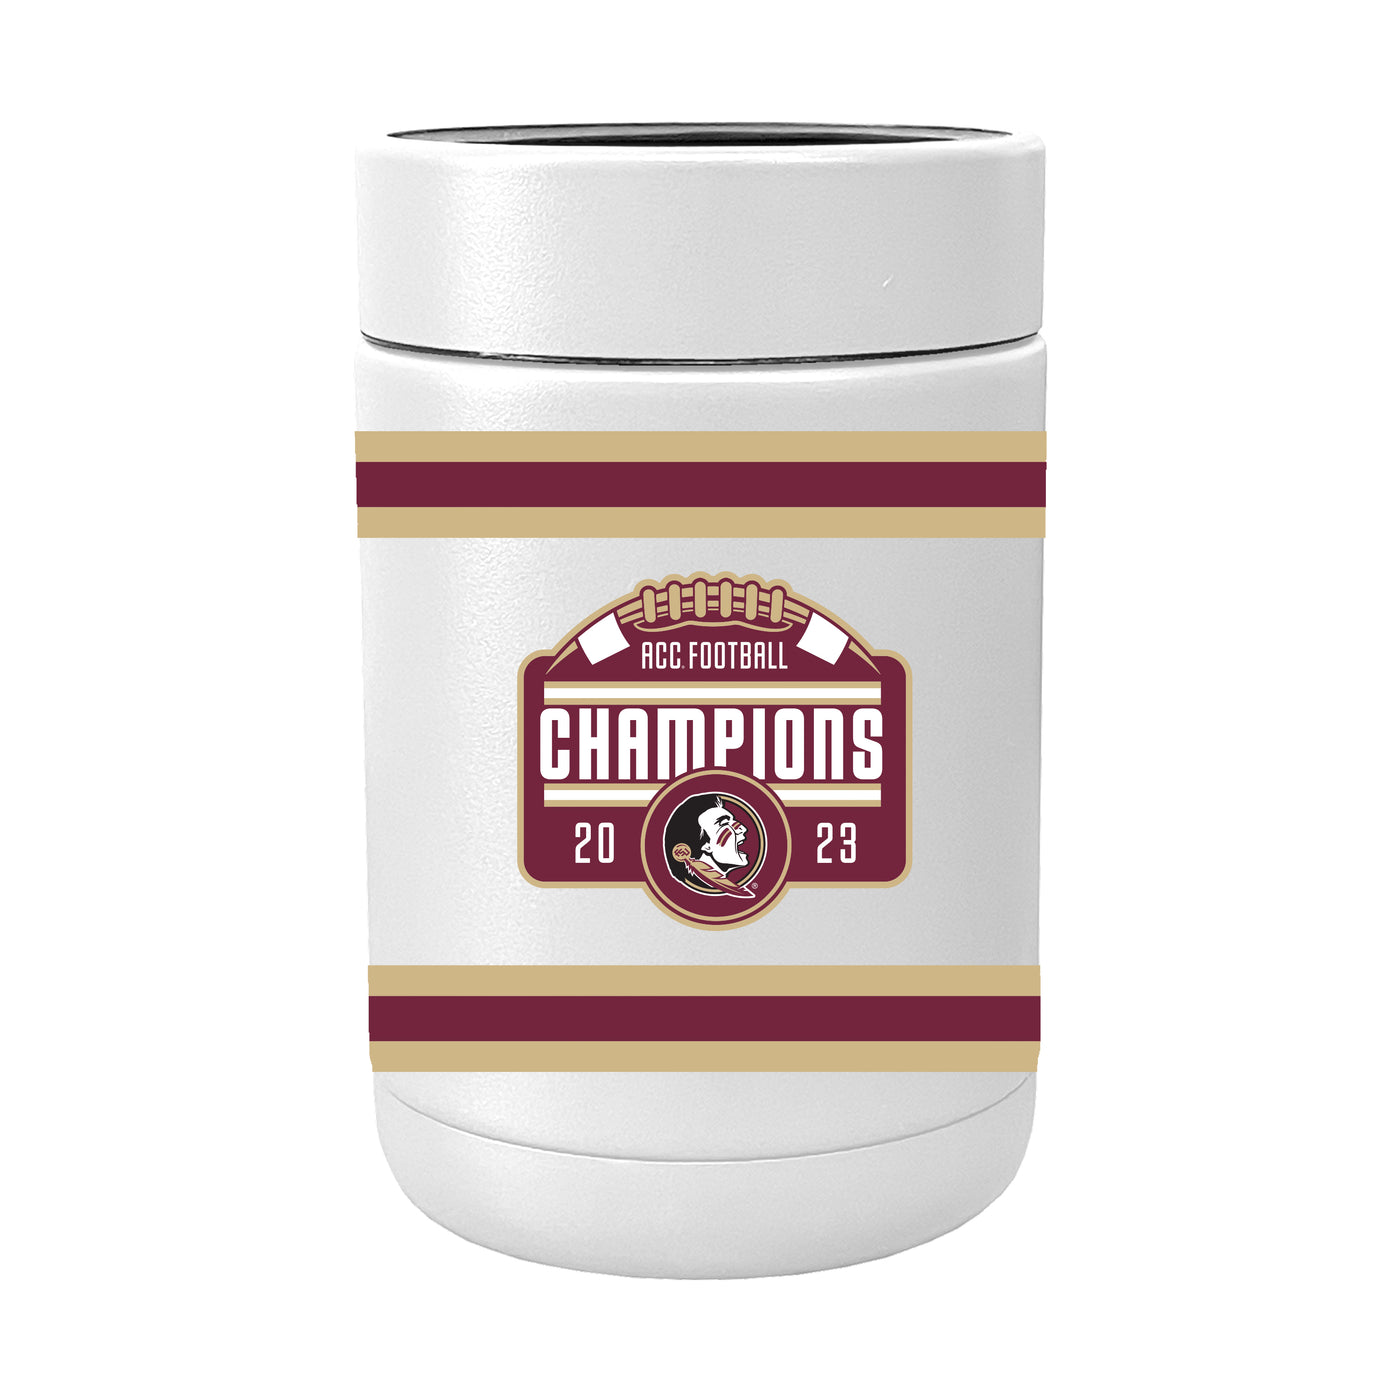 Florida State 2023 ACC Champions Powder Coat Coolie